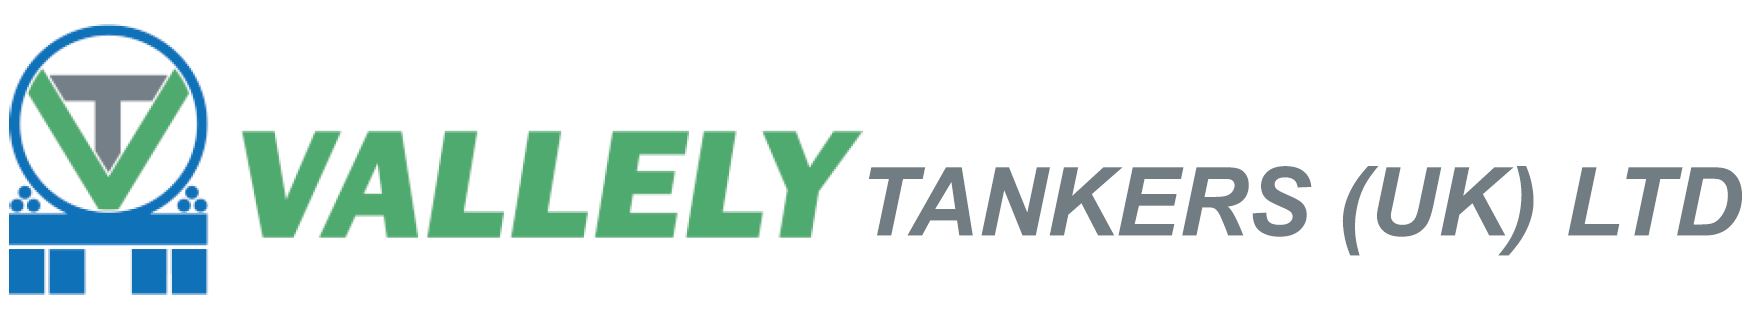 Vallely Tankers